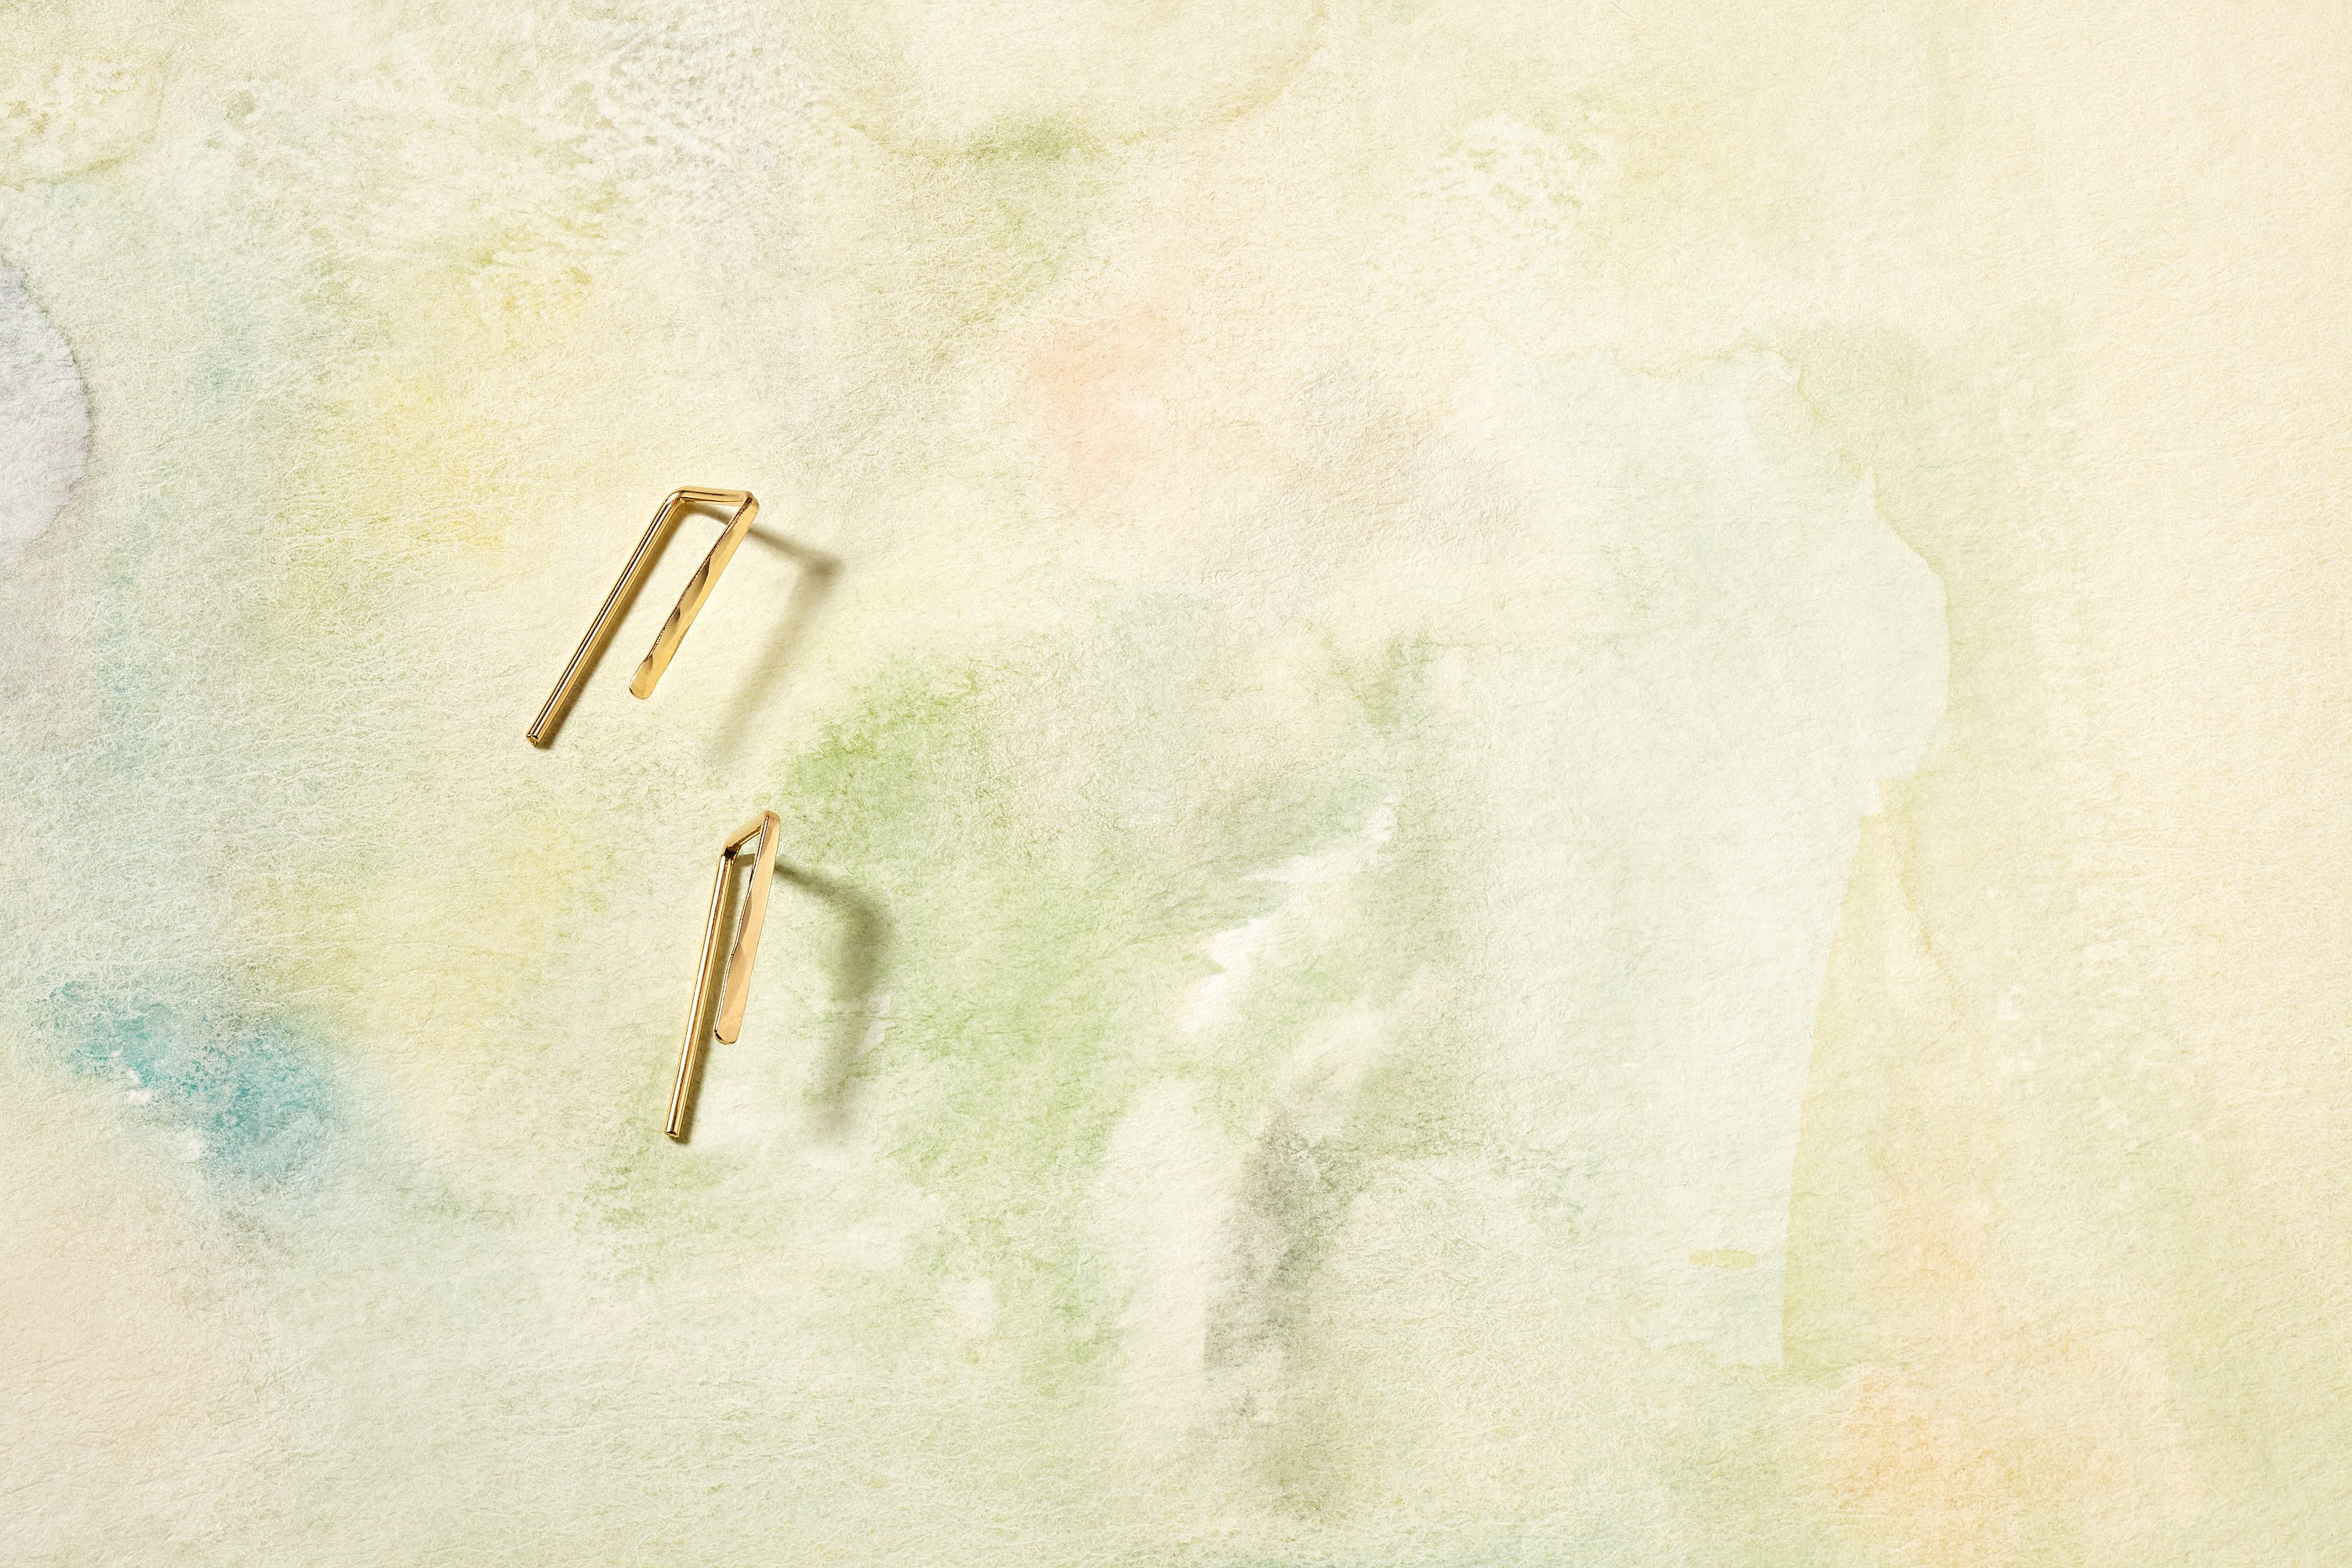 The Staple Hook, a modern threader earring in 14k gold with your choice of classic hammered textured or nugget texture